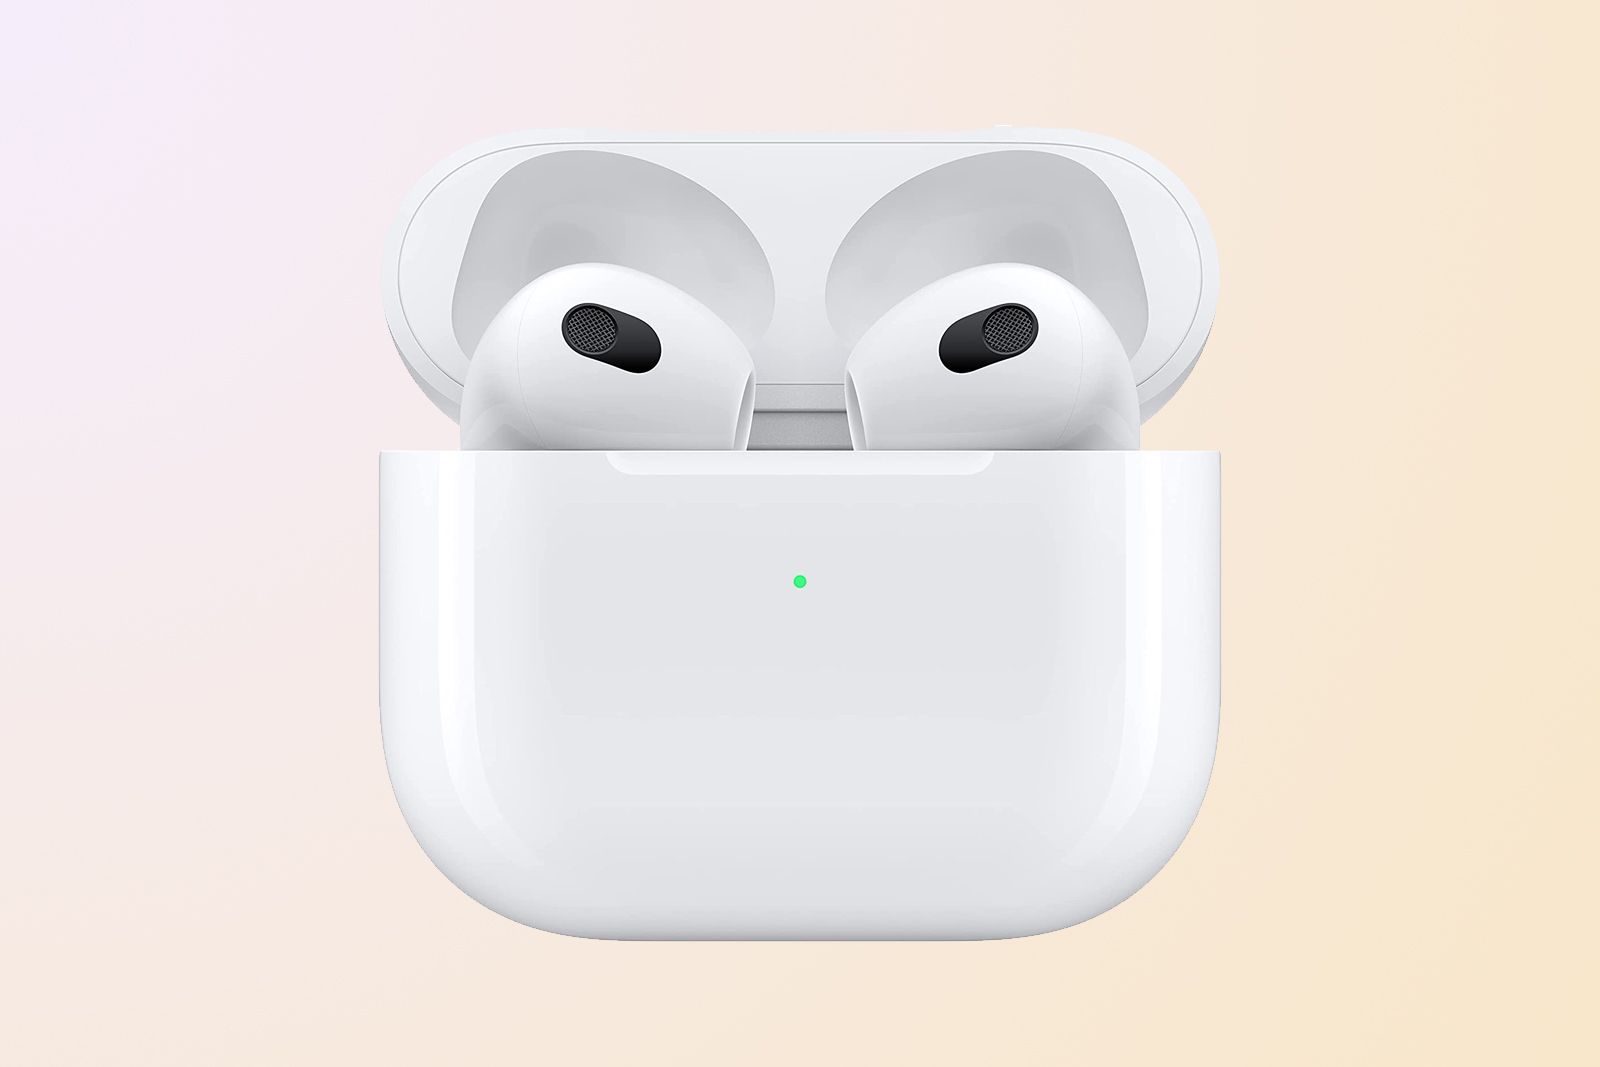 Best early Prime Day AirPods deals - Apple AirPods 3